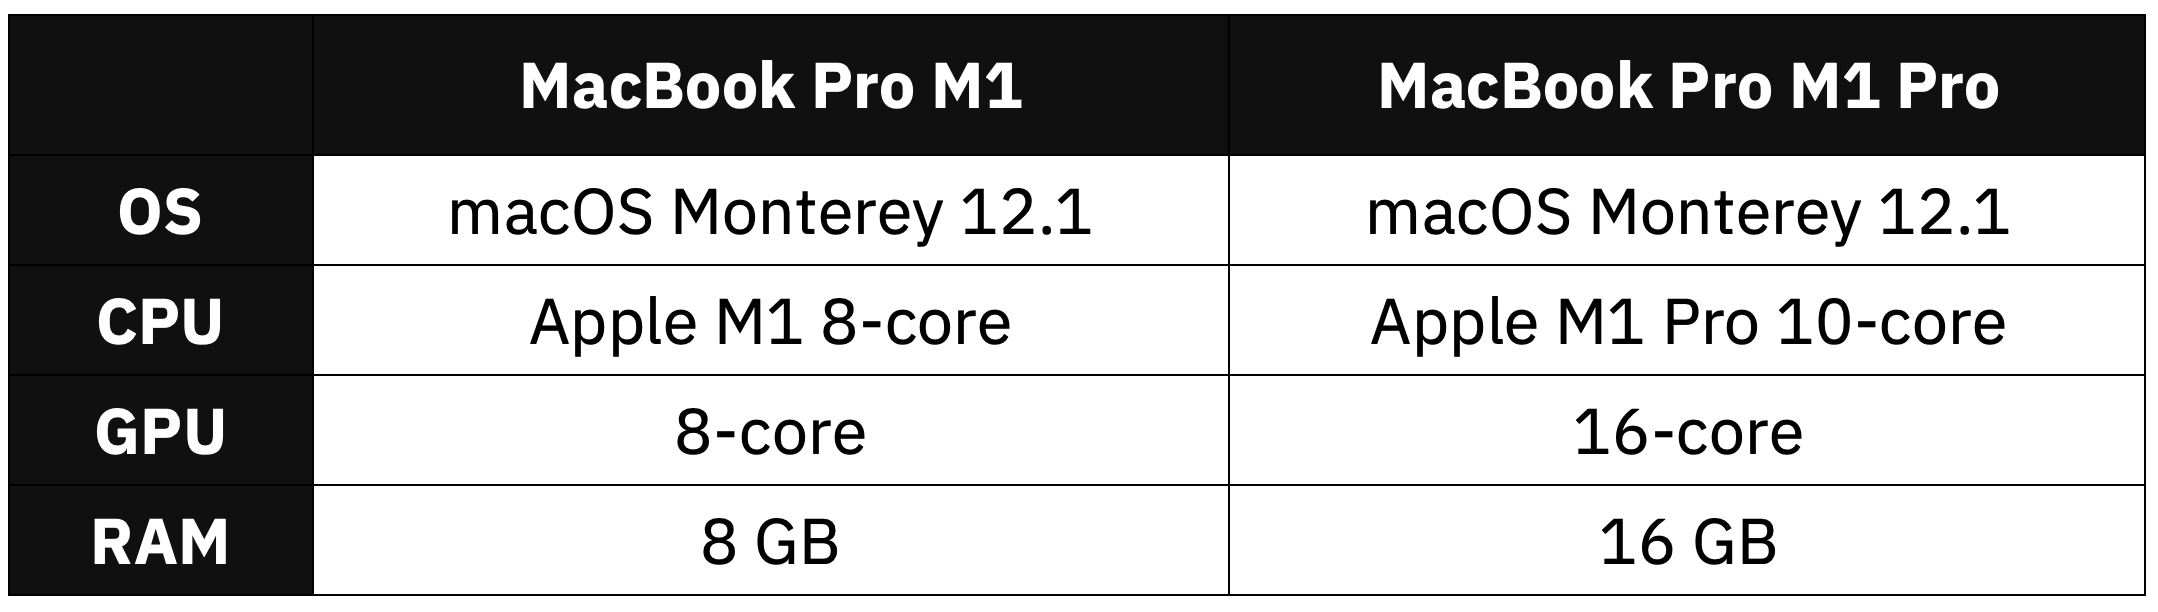 Image 1 - Hardware specification comparison (image by author)